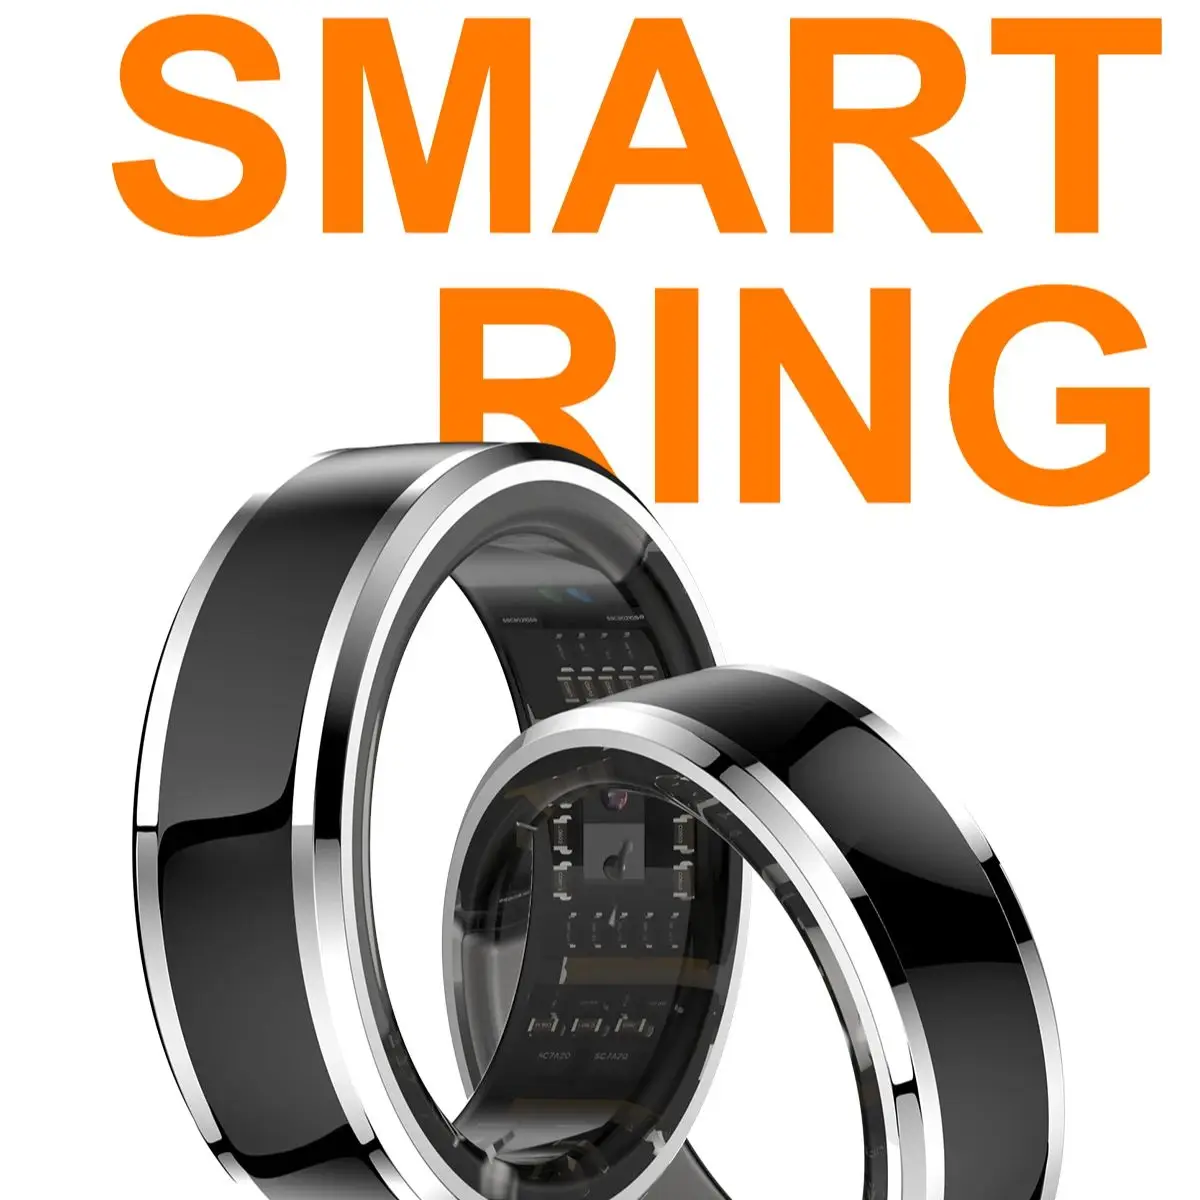 Forget Bulky Smart Watches, Slip On a Smart Ring | Innovation| Smithsonian  Magazine